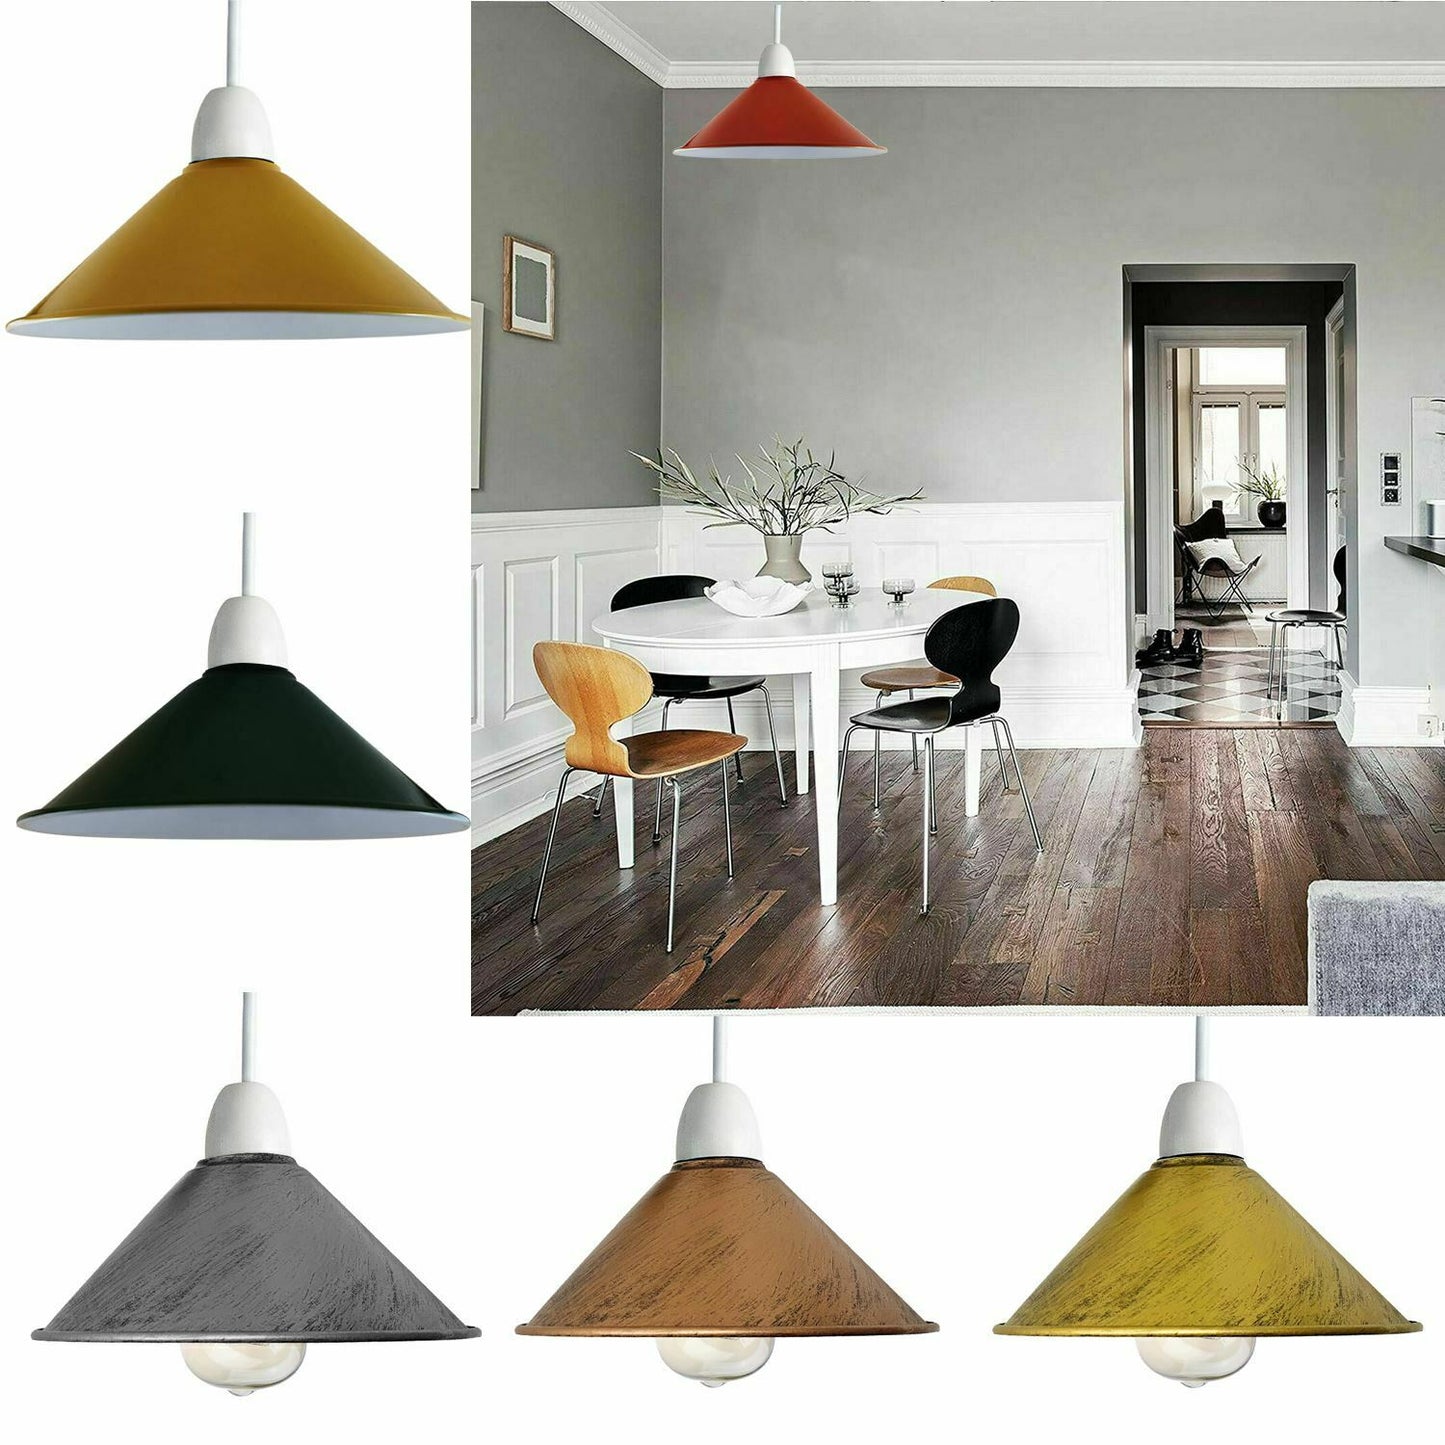 Cone ceiling lamp shade for living room.JPG